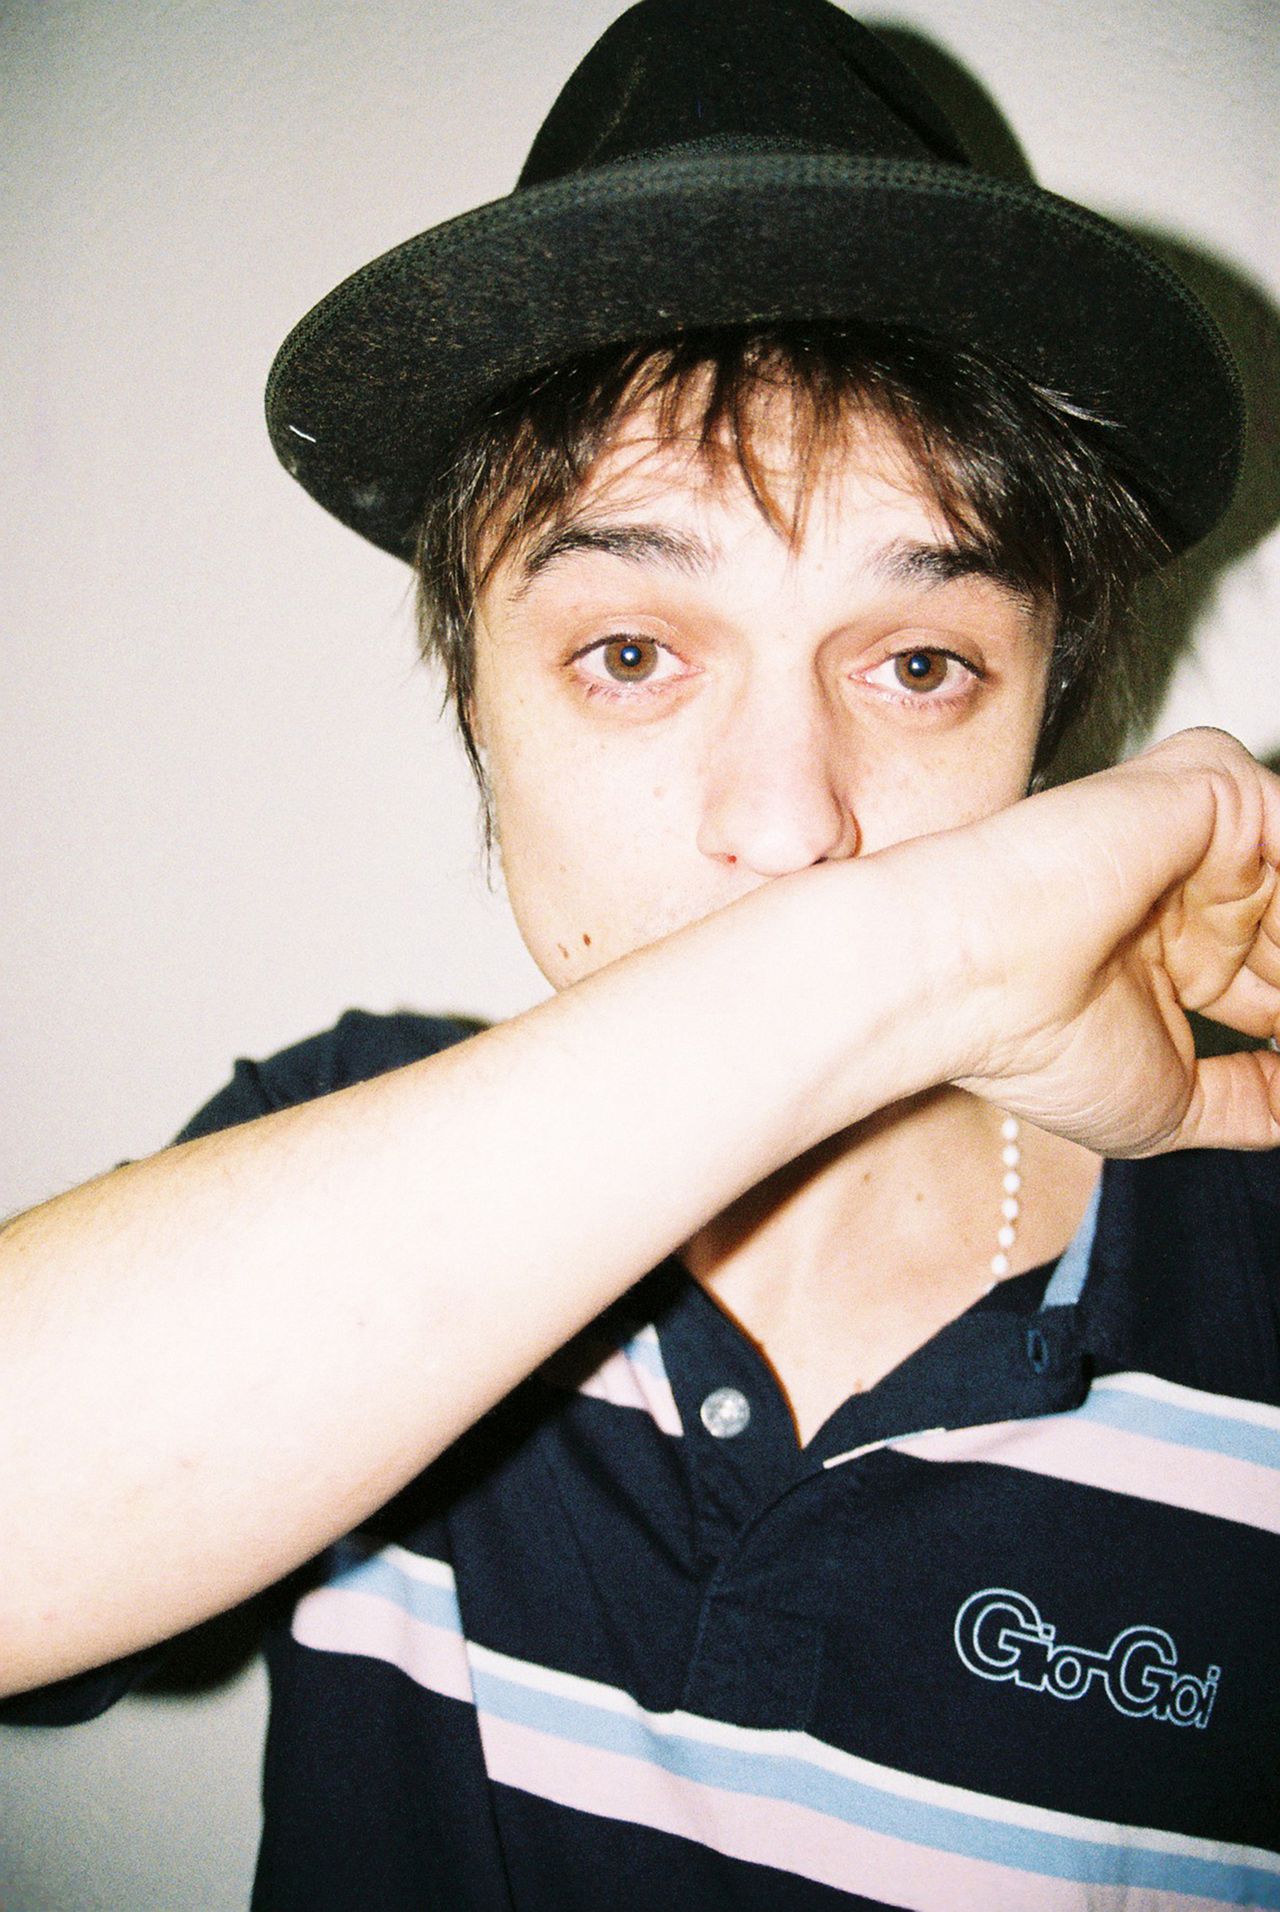 Pete Doherty © Richard Kelly. All images courtesy of the photographer